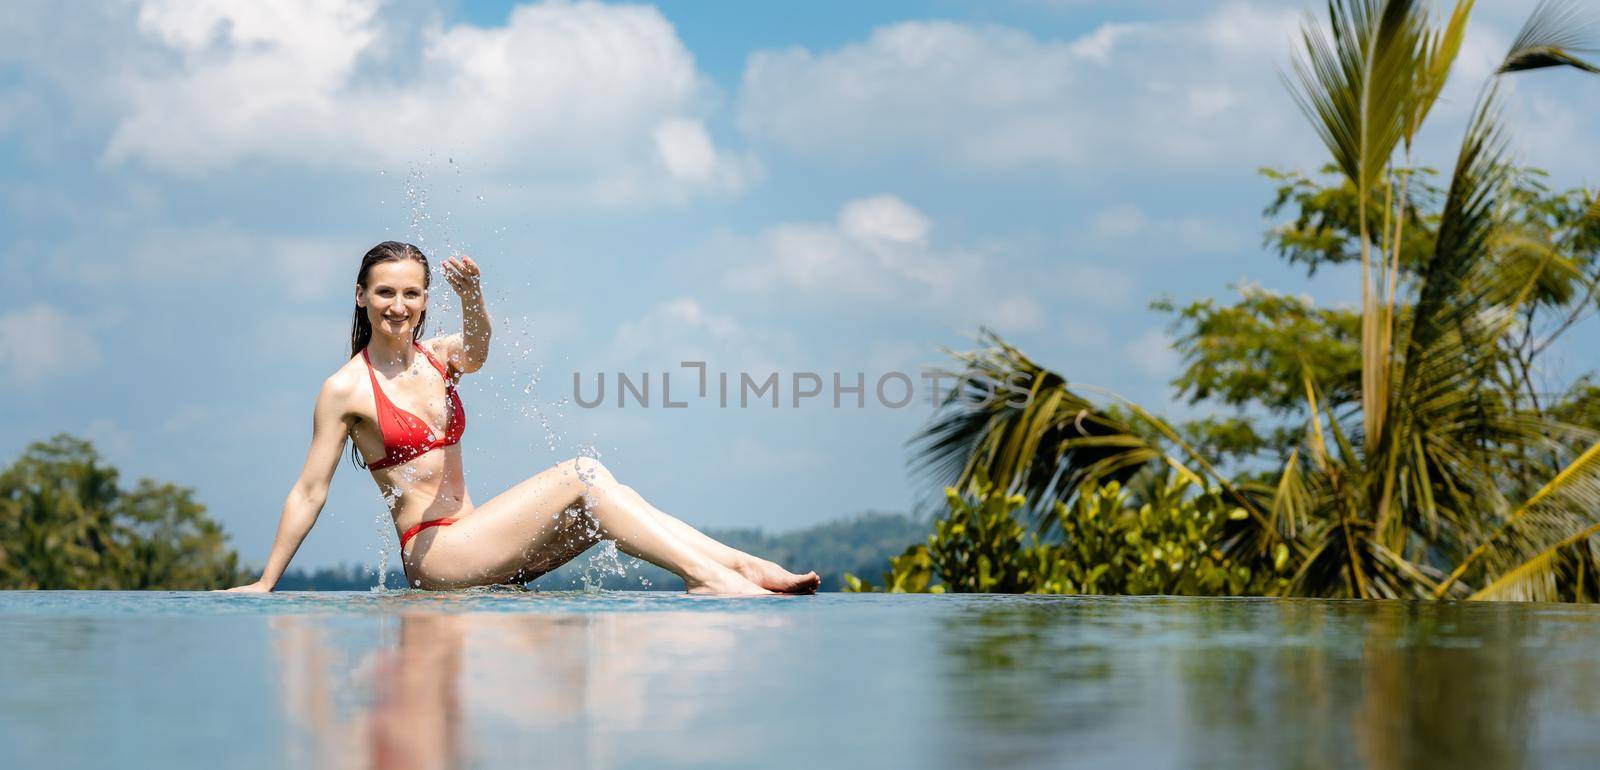 Woman playing with water in the swimming pool by Kzenon